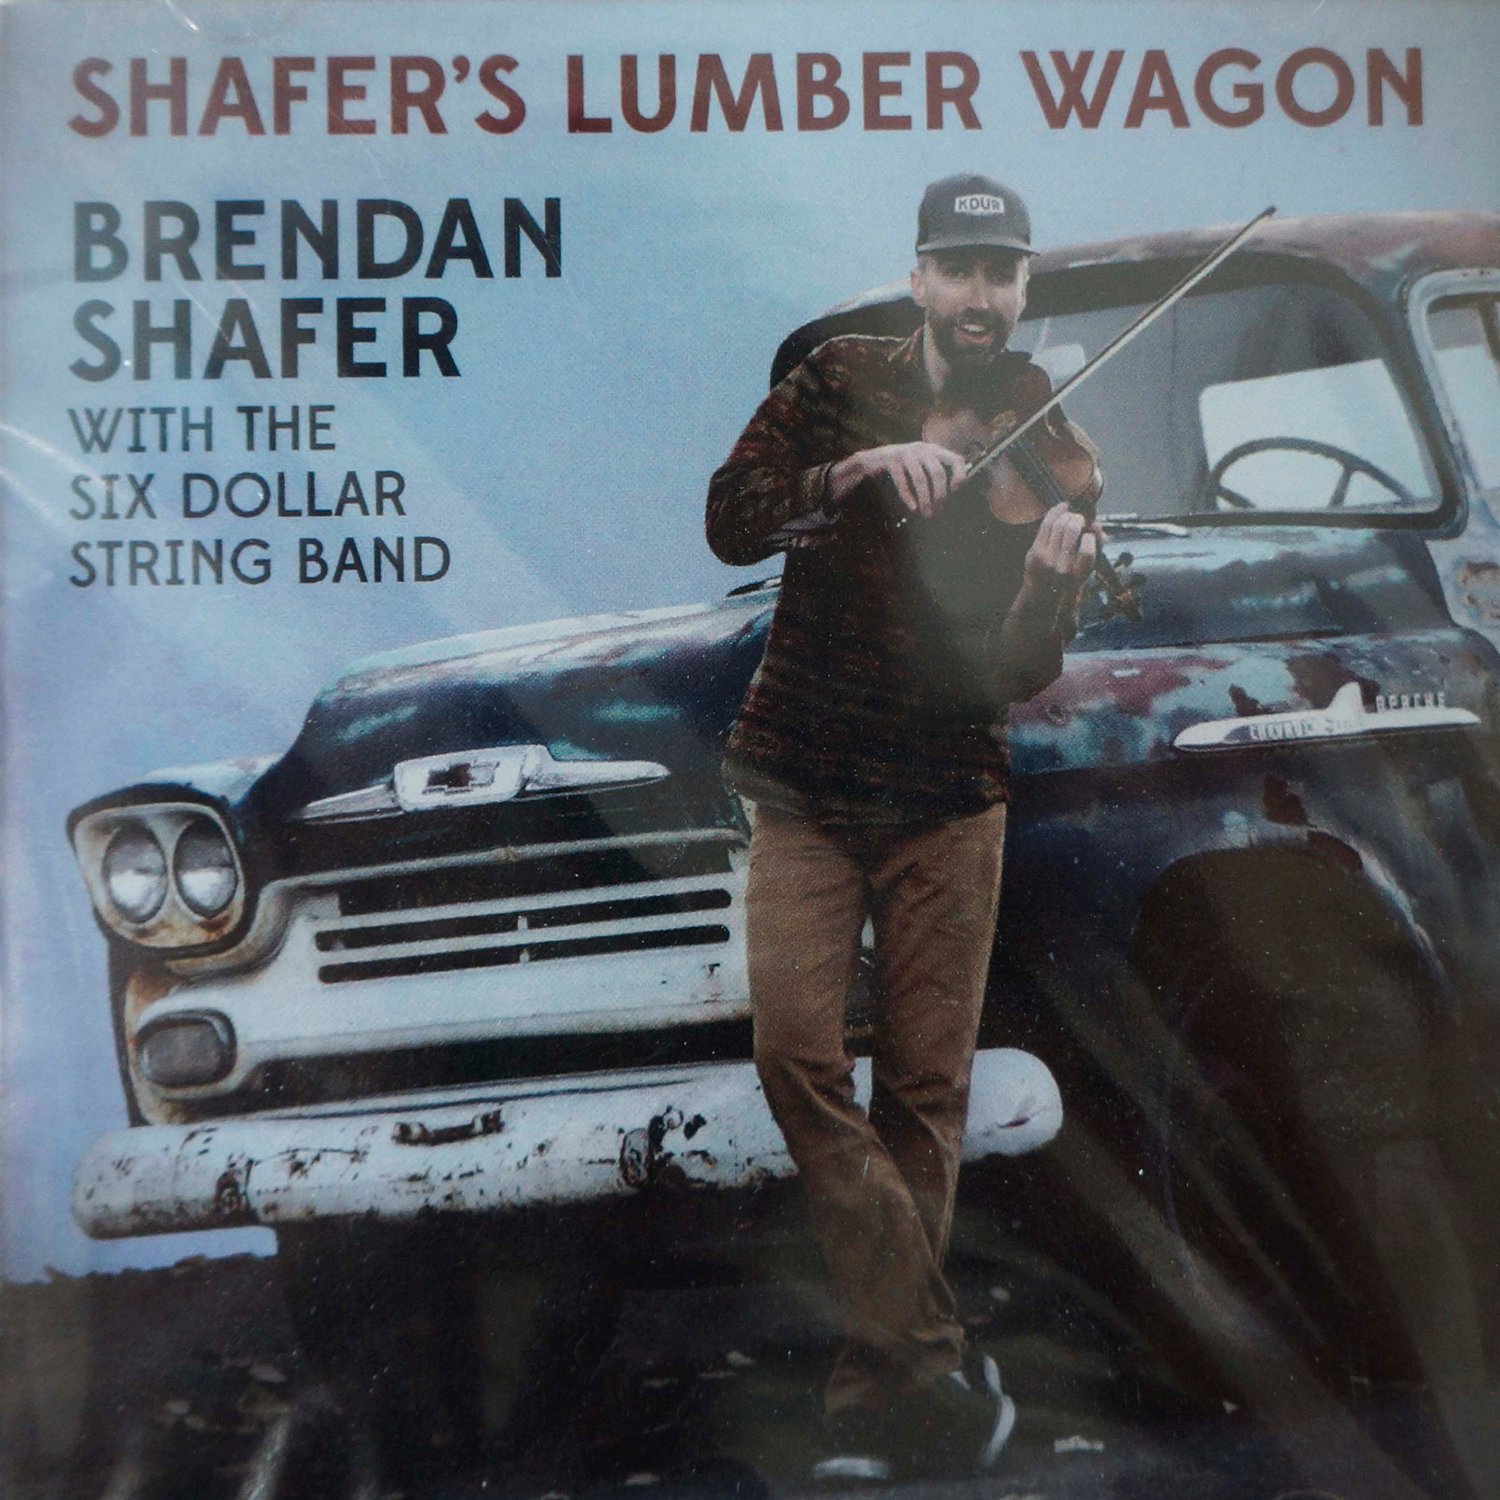 "Shafer's Lumber Wagon" by Brendan Shafer with the Six Dollar String Band